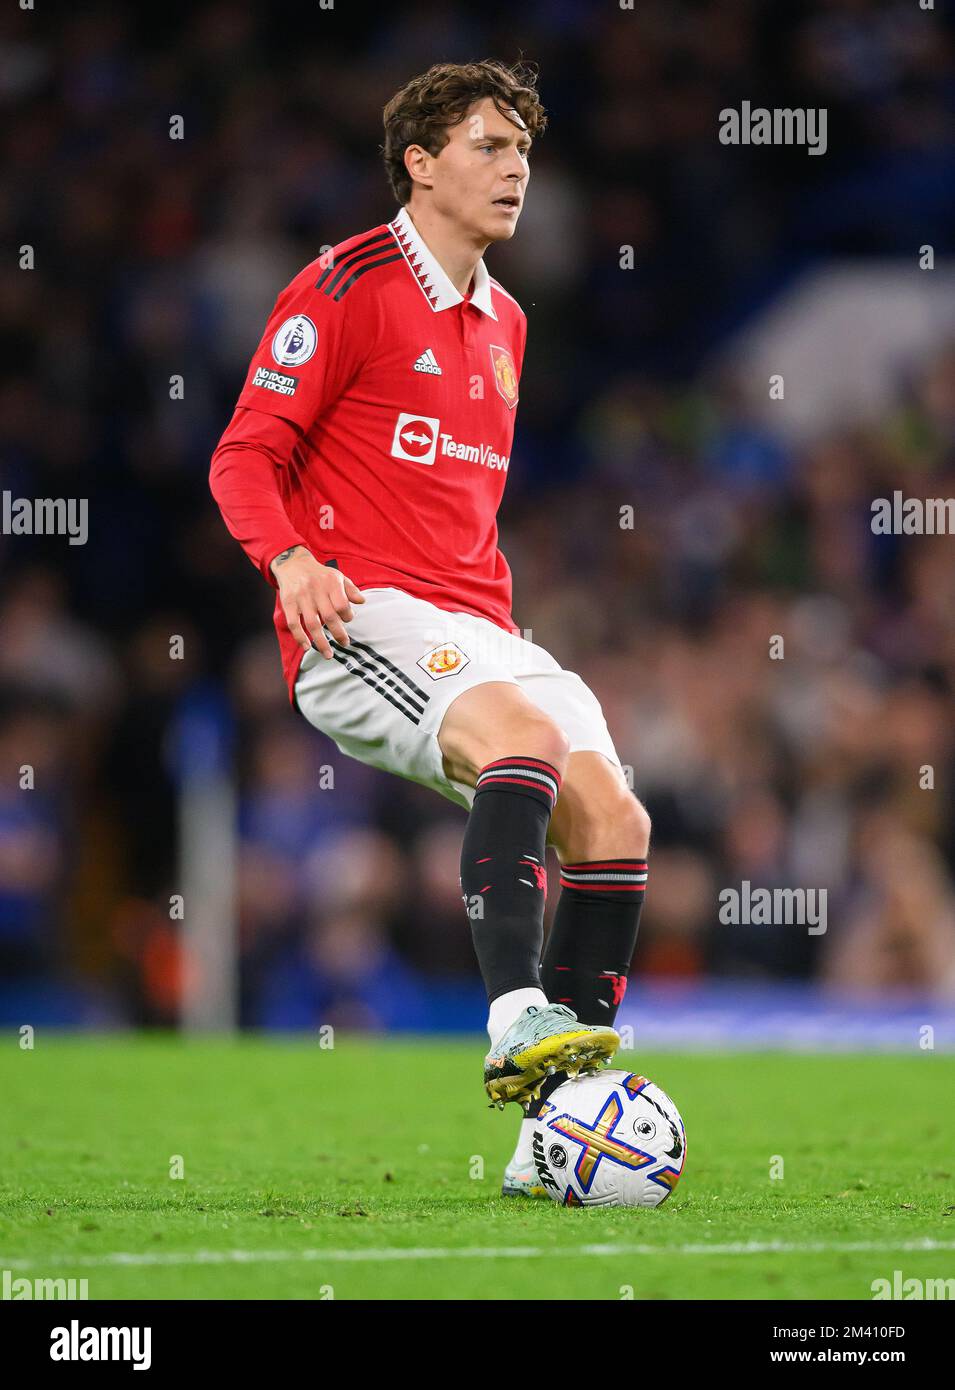 22 Oct 2022 - Chelsea v Manchester United - Premier League - Stamford Bridge  Manchester United's Victor Lindelof during the Premier League match against Chelsea at Stamford Bridge, London. Picture : Mark Pain / Alamy Stock Photo